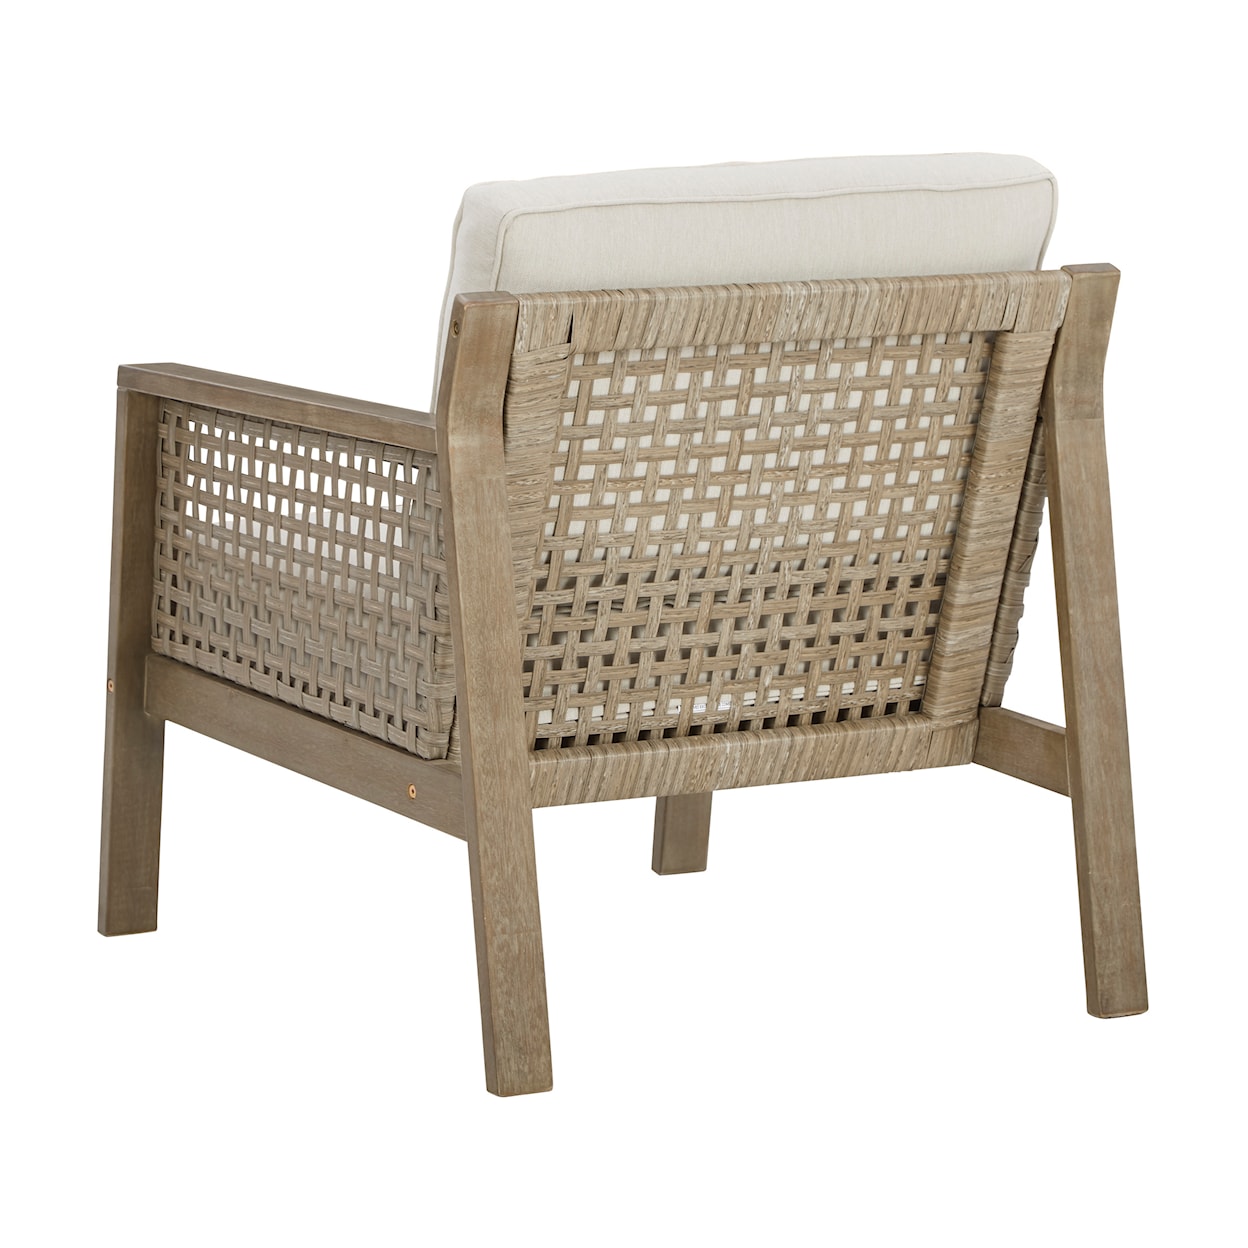 Signature Design by Ashley Barn Cove Lounge Chair with Cushion